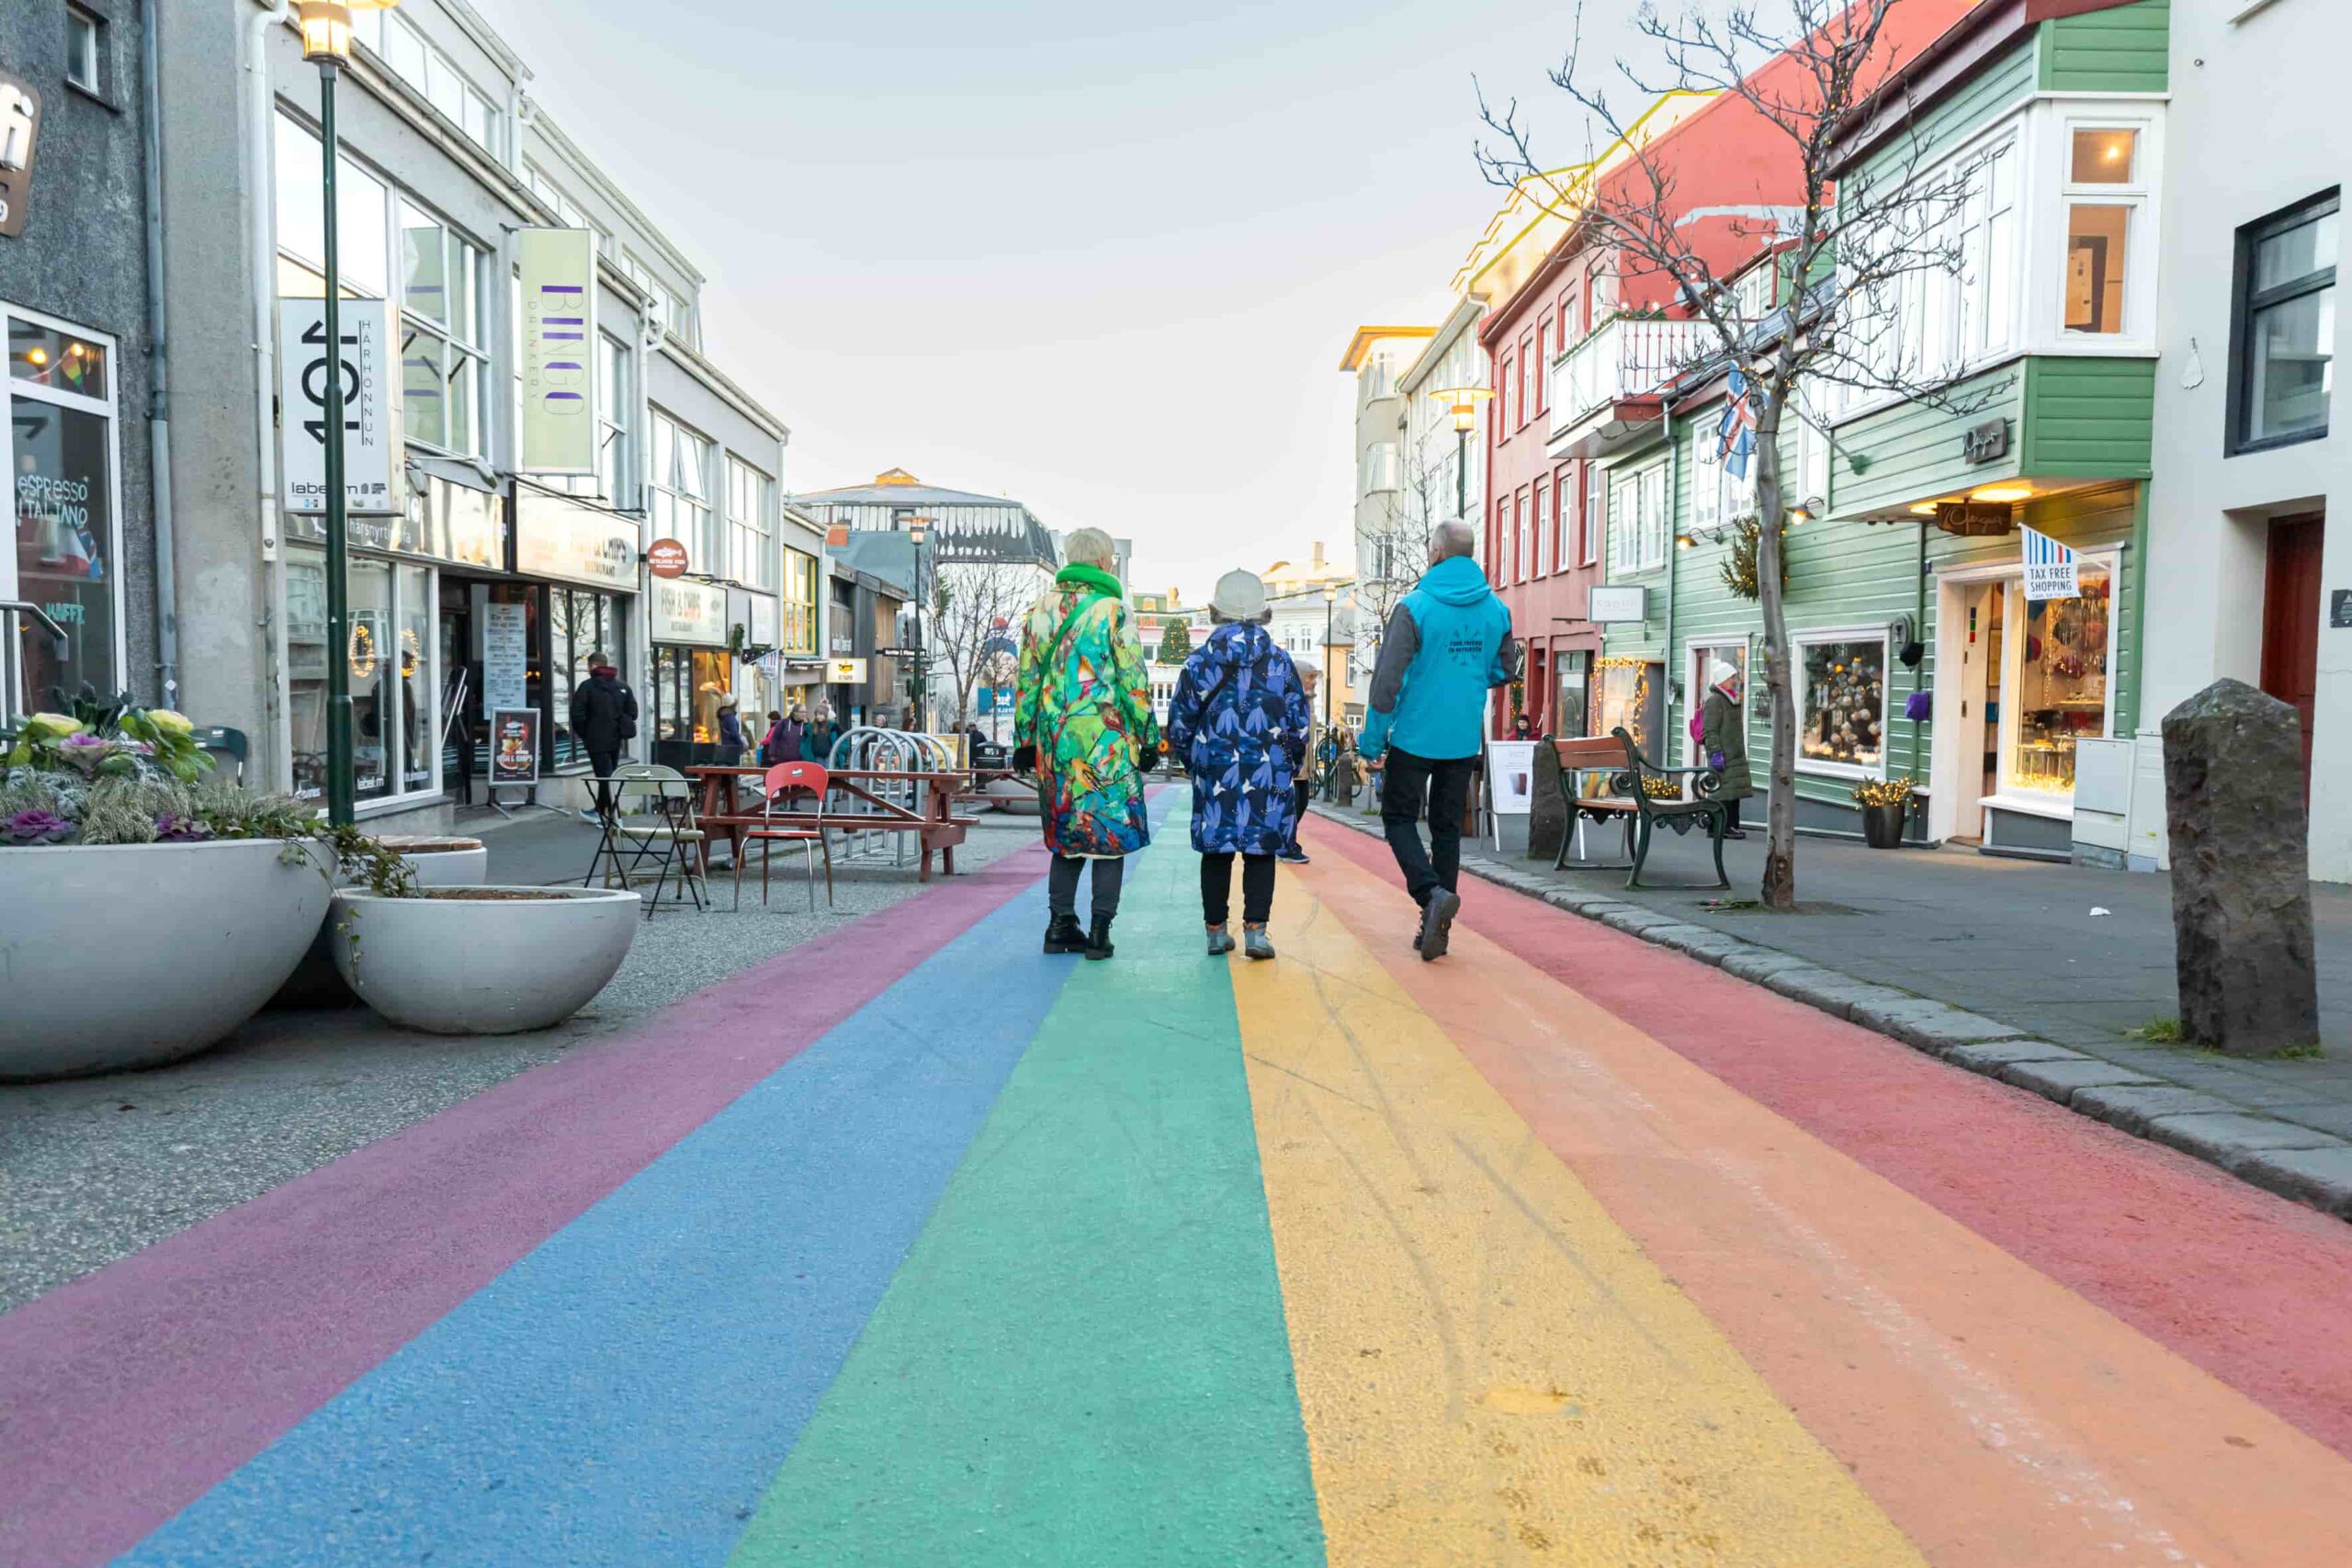 A group of travellers walking down the Rainbow Street in downtown Reykjavik